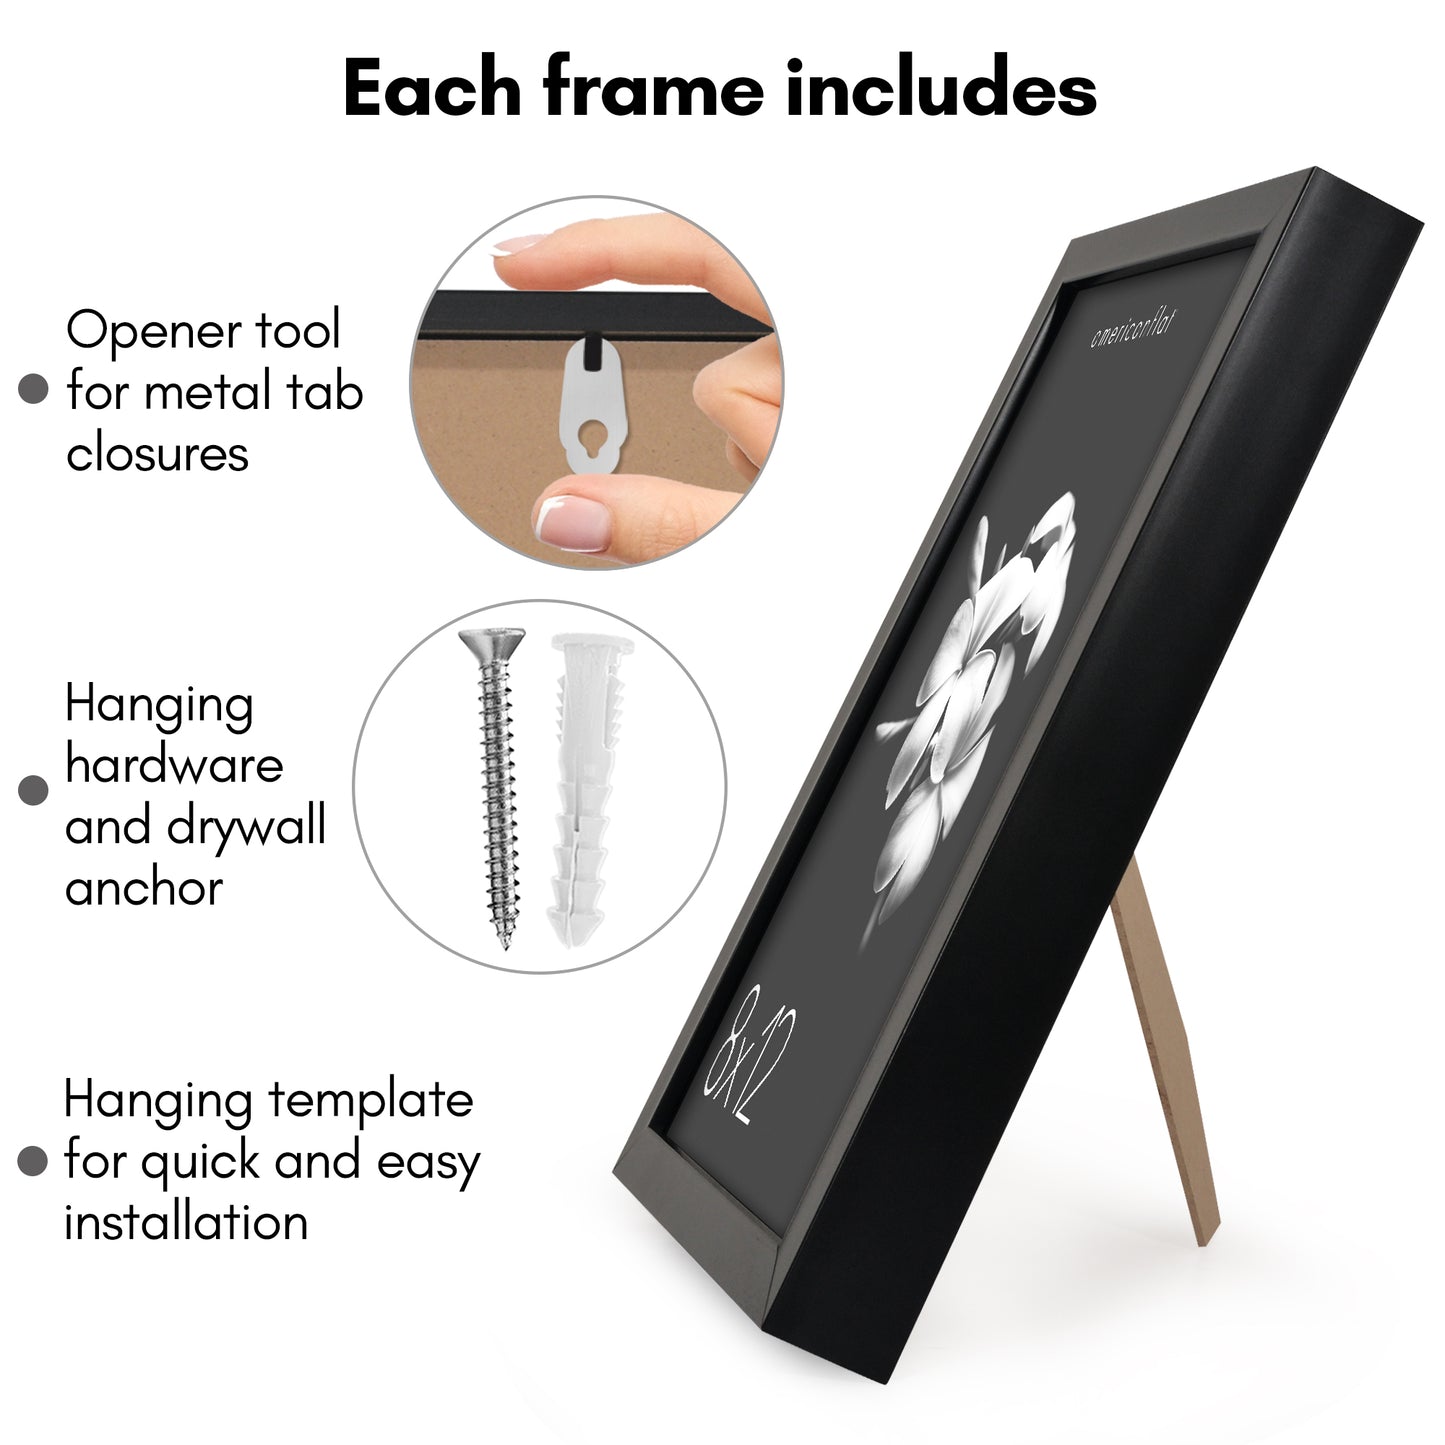 Deep Molding Frame without Mat | Choose Size and Color